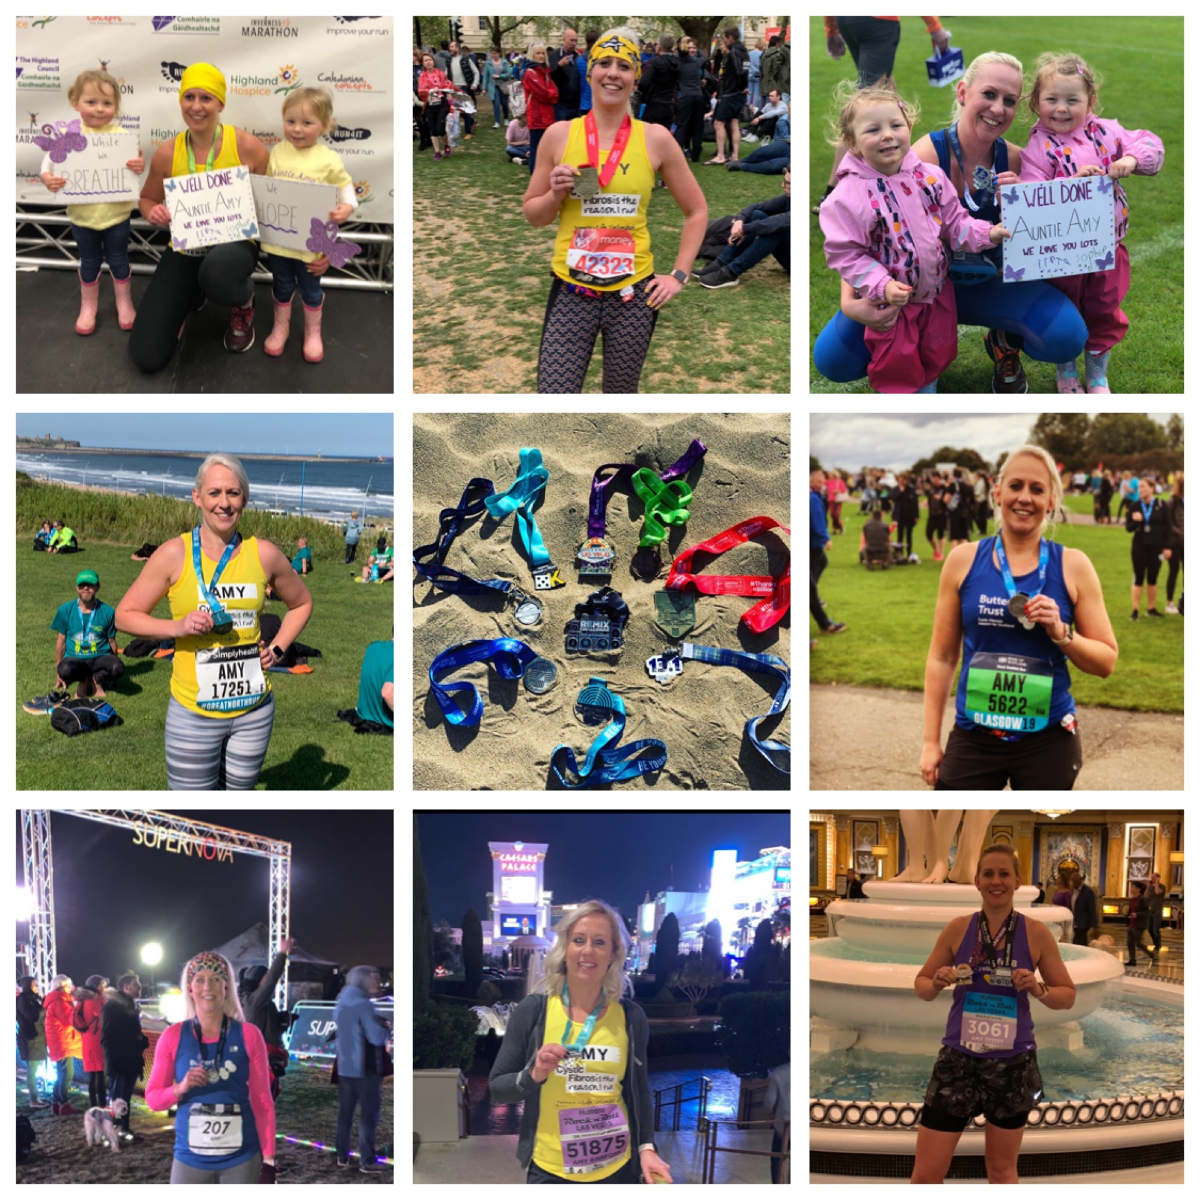 Dentons' Amy Cornelius on track to raise £8,000 for cystic fibrosis charities